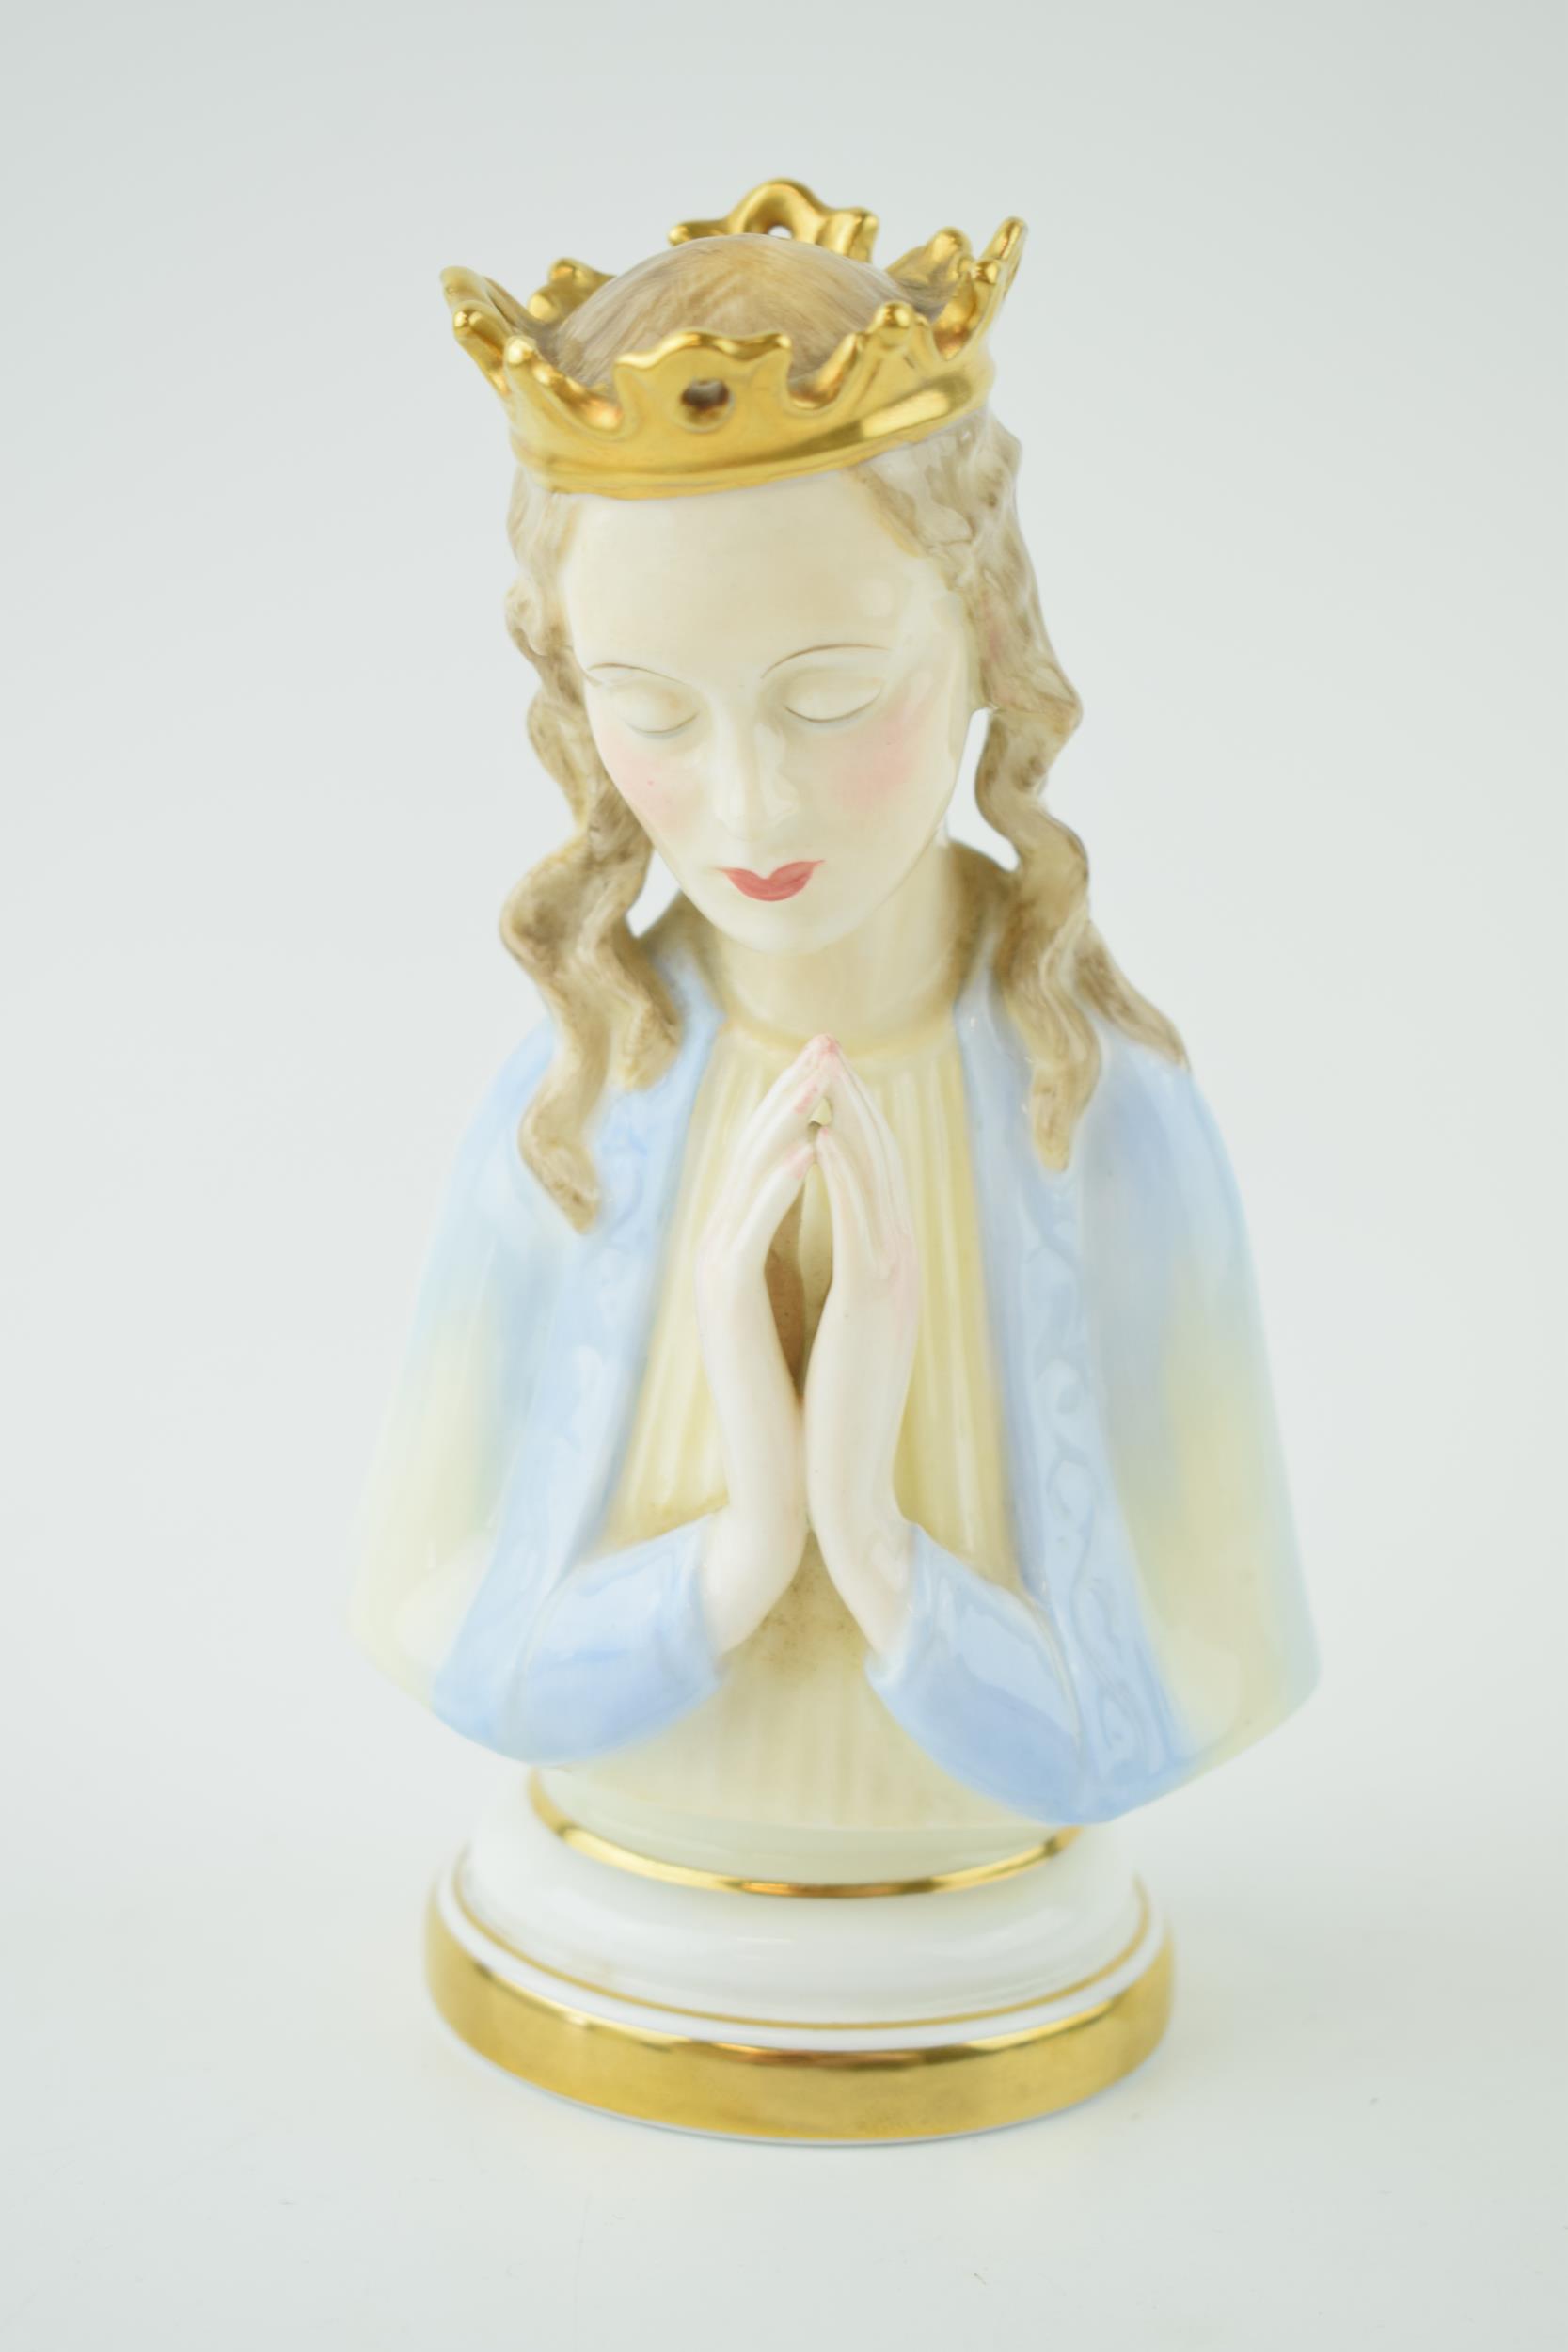 Paragon bust of Madonna, 16cm tall. In good condition with no obvious damage or restoration.